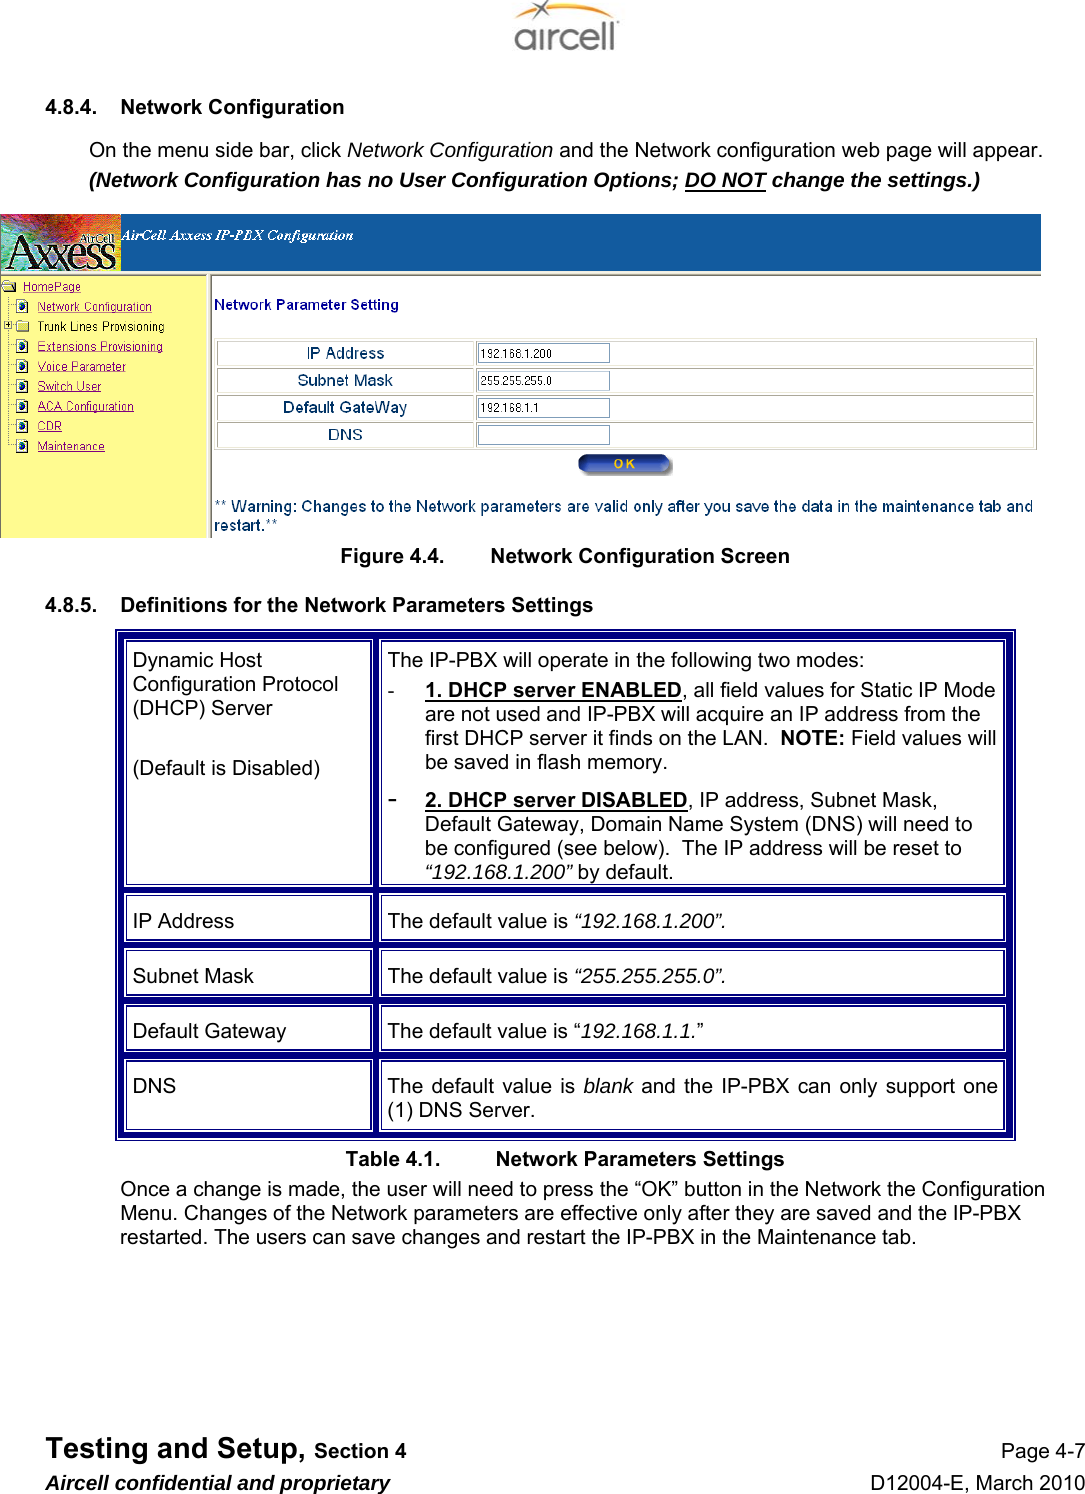  Testing and Setup, Section 4 Page 4-7 Aircell confidential and proprietary D12004-E, March 2010 4.8.4.  Network Configuration On the menu side bar, click Network Configuration and the Network configuration web page will appear. (Network Configuration has no User Configuration Options; DO NOT change the settings.) Figure 4.4.  Network Configuration Screen 4.8.5.  Definitions for the Network Parameters Settings Dynamic Host Configuration Protocol (DHCP) Server  (Default is Disabled) The IP-PBX will operate in the following two modes: - 1. DHCP server ENABLED, all field values for Static IP Mode are not used and IP-PBX will acquire an IP address from the first DHCP server it finds on the LAN.  NOTE: Field values will be saved in flash memory. - 2. DHCP server DISABLED, IP address, Subnet Mask, Default Gateway, Domain Name System (DNS) will need to be configured (see below).  The IP address will be reset to “192.168.1.200” by default. IP Address  The default value is “192.168.1.200”. Subnet Mask  The default value is “255.255.255.0”. Default Gateway  The default value is “192.168.1.1.” DNS  The default value is blank and the IP-PBX can only support one (1) DNS Server. Table 4.1.  Network Parameters Settings Once a change is made, the user will need to press the “OK” button in the Network the Configuration Menu. Changes of the Network parameters are effective only after they are saved and the IP-PBX restarted. The users can save changes and restart the IP-PBX in the Maintenance tab.      